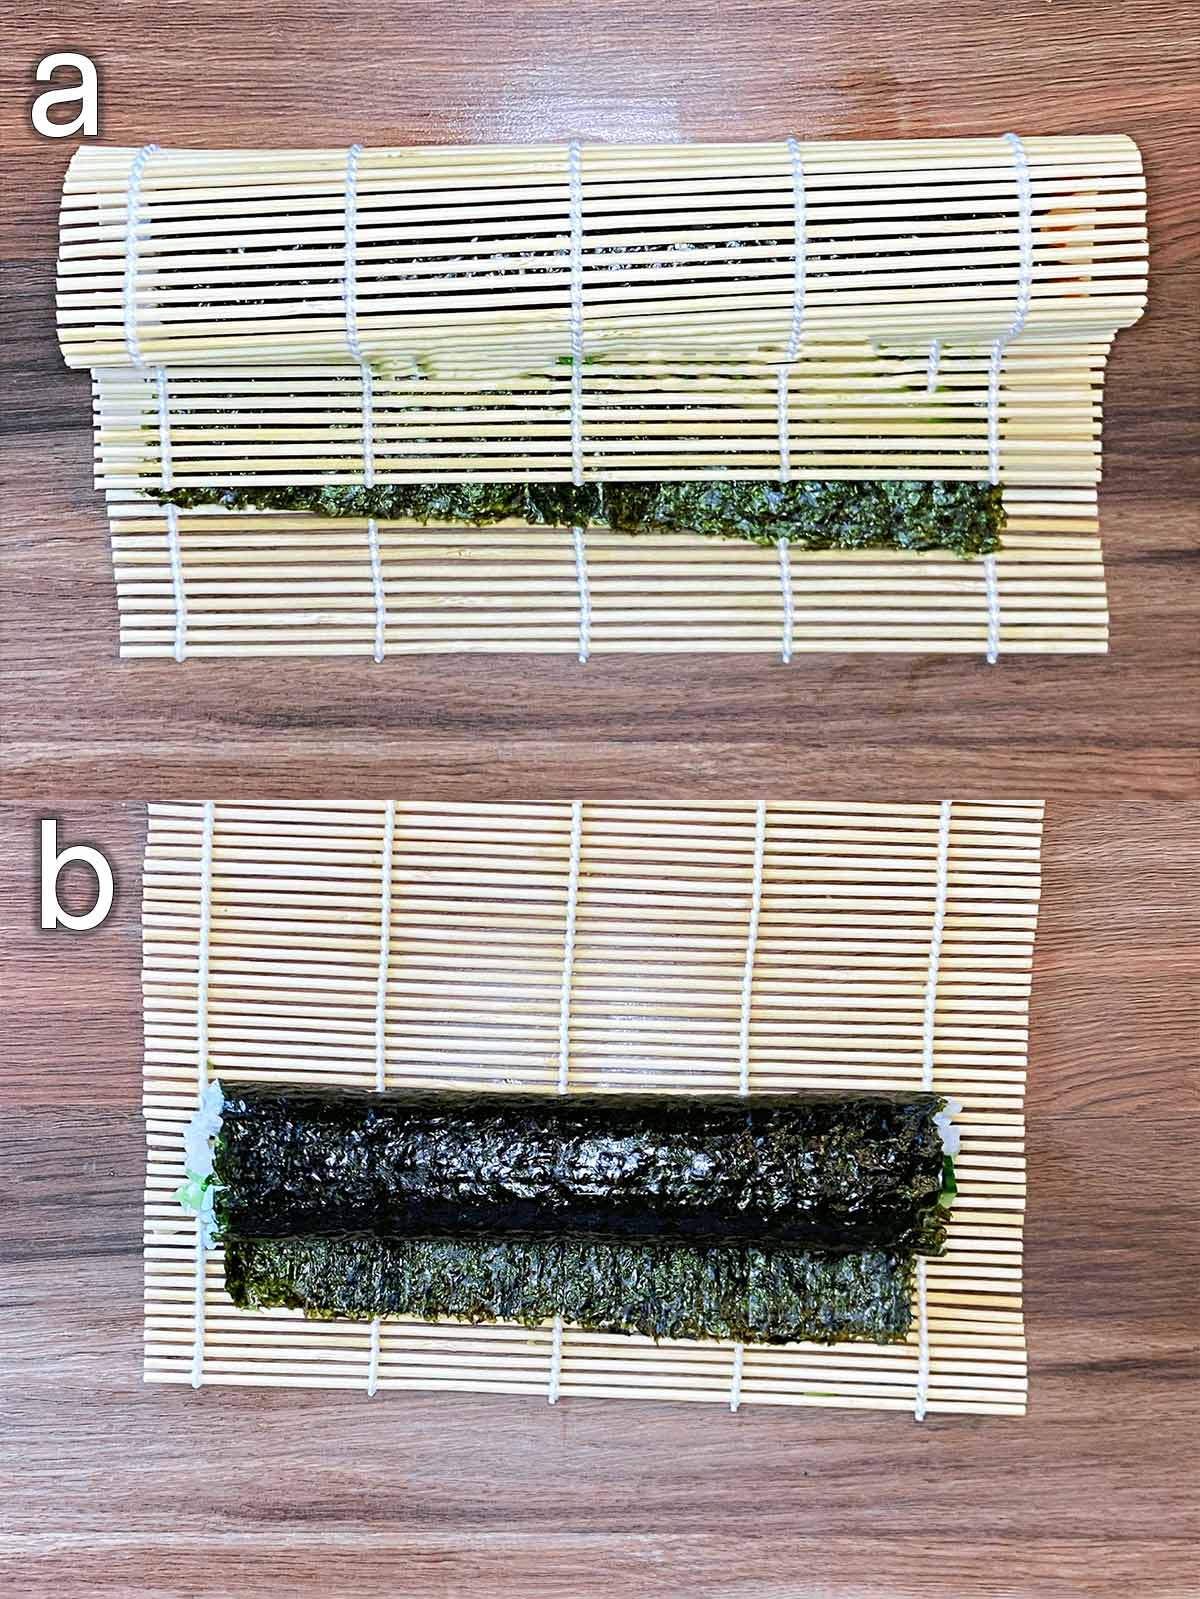 Two shot collage of sushi being rolled in a mat, then the fully rolled roll.